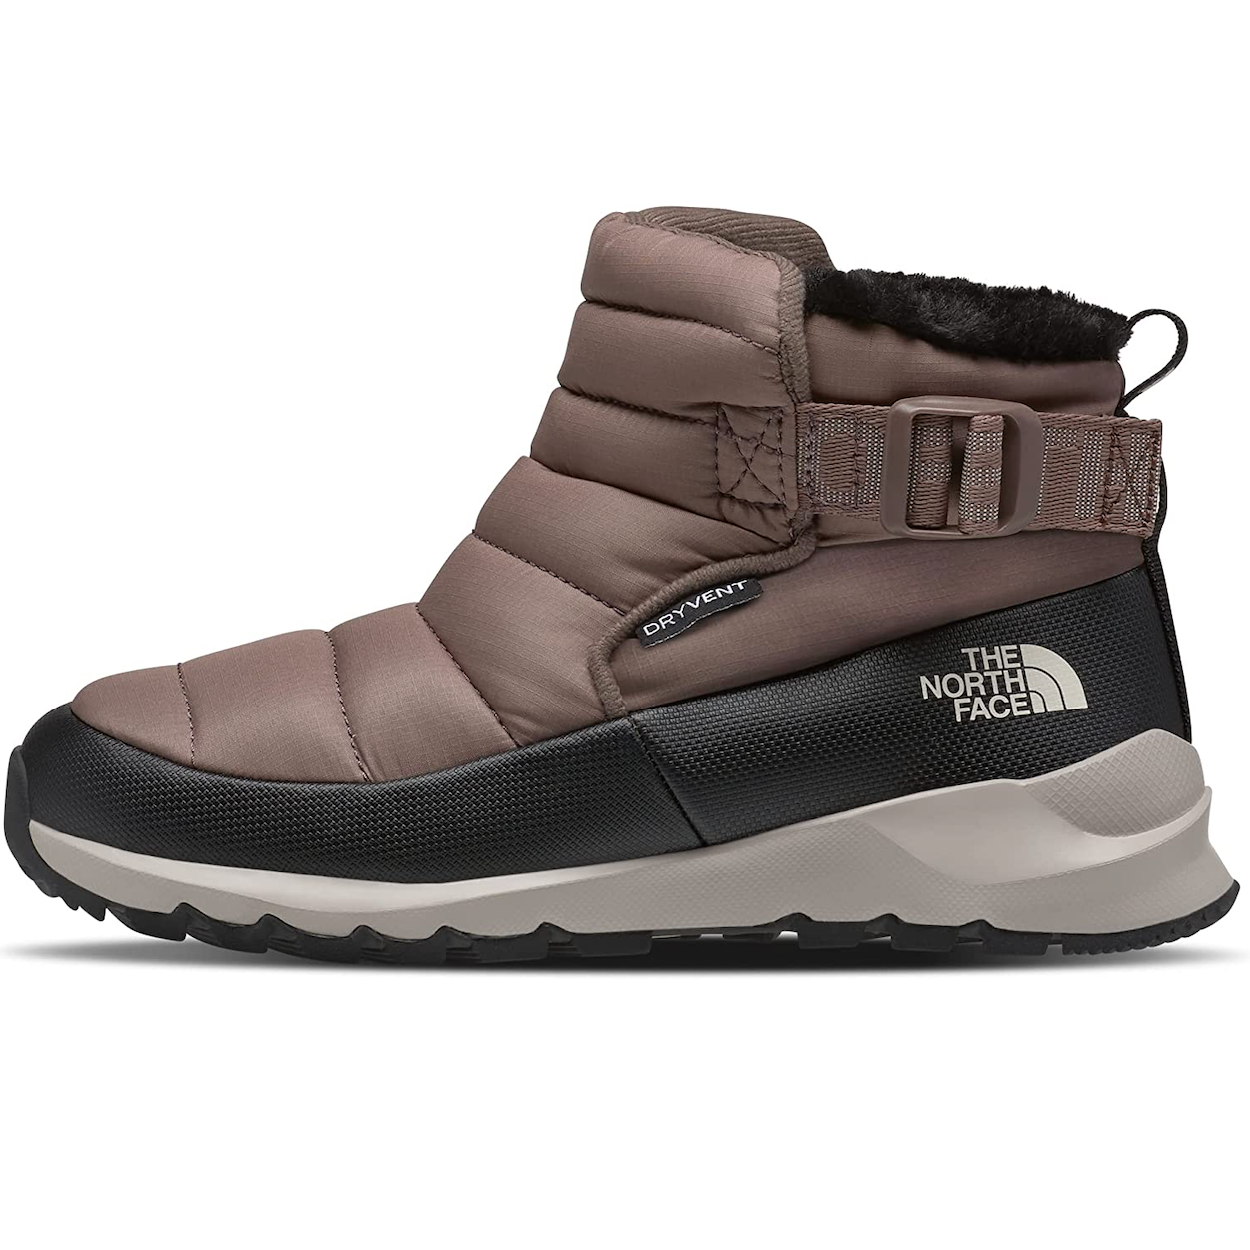 The North Face ThermoBall Ankle Boot